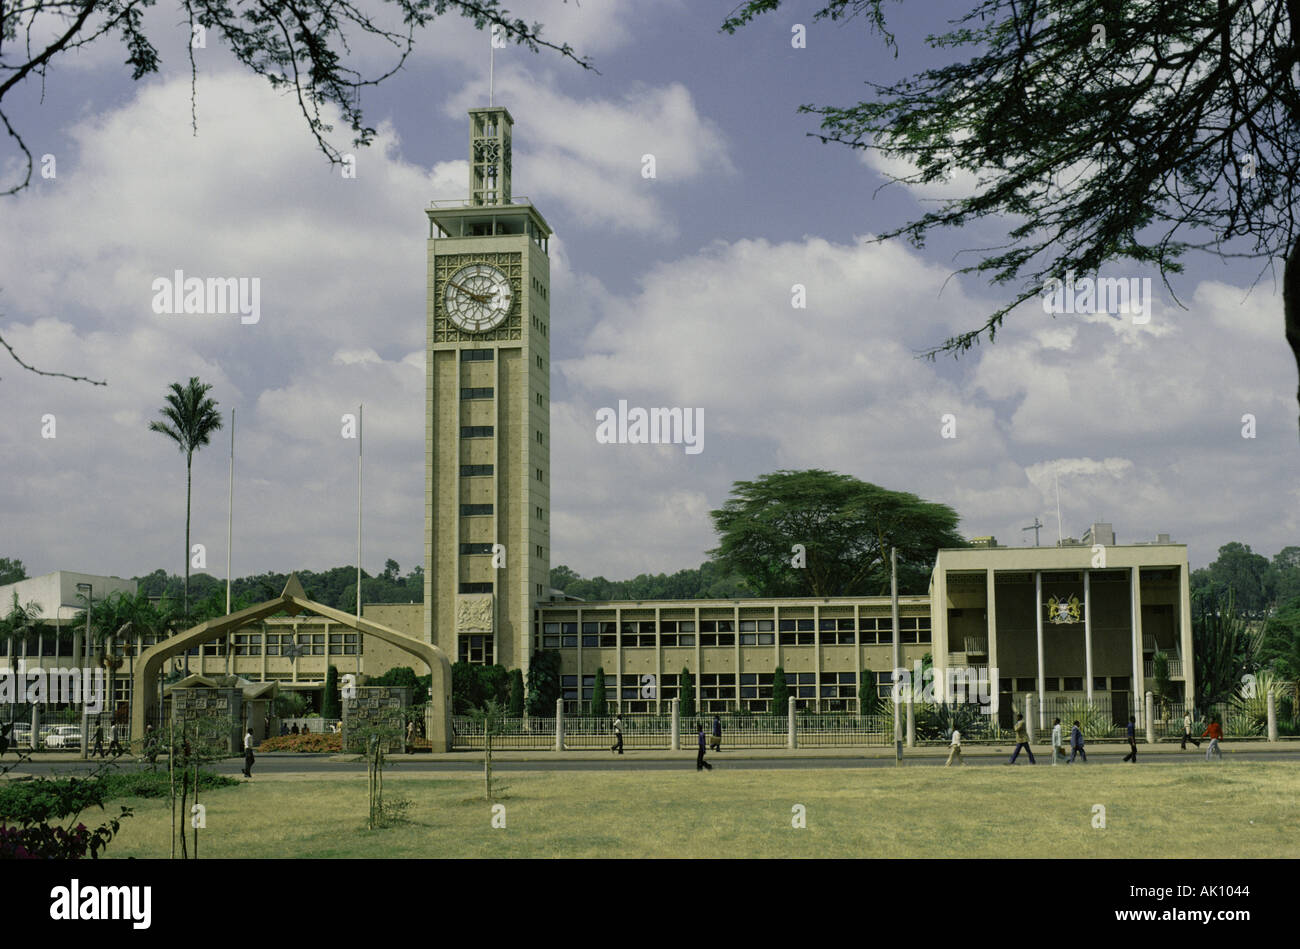 House of Parliament Nairobi Kenya East Africa Nairobi is Kenyas capital city with a population of about 3 million Stock Photo